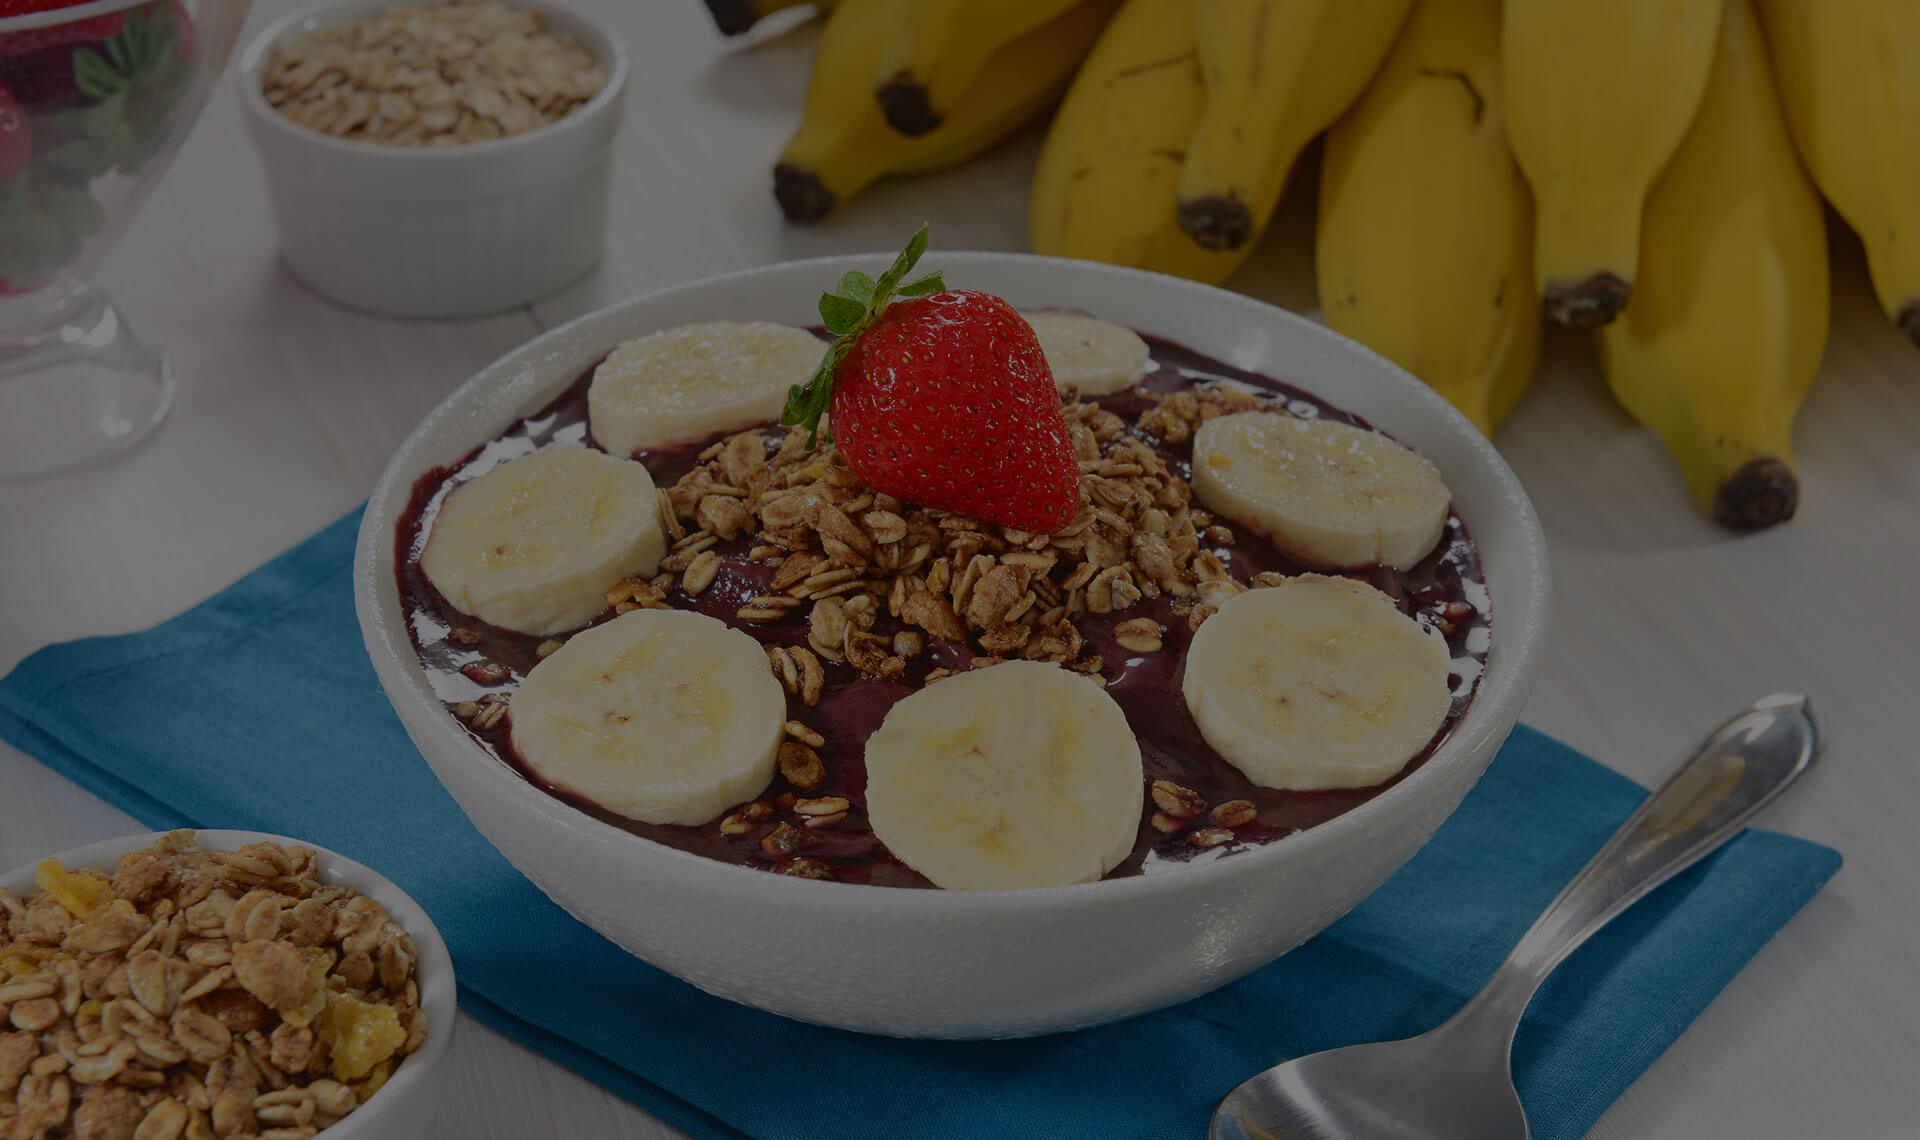 Açaì in a white bowl topped with oats, banana and strawberry with more fruit and oats in the background.